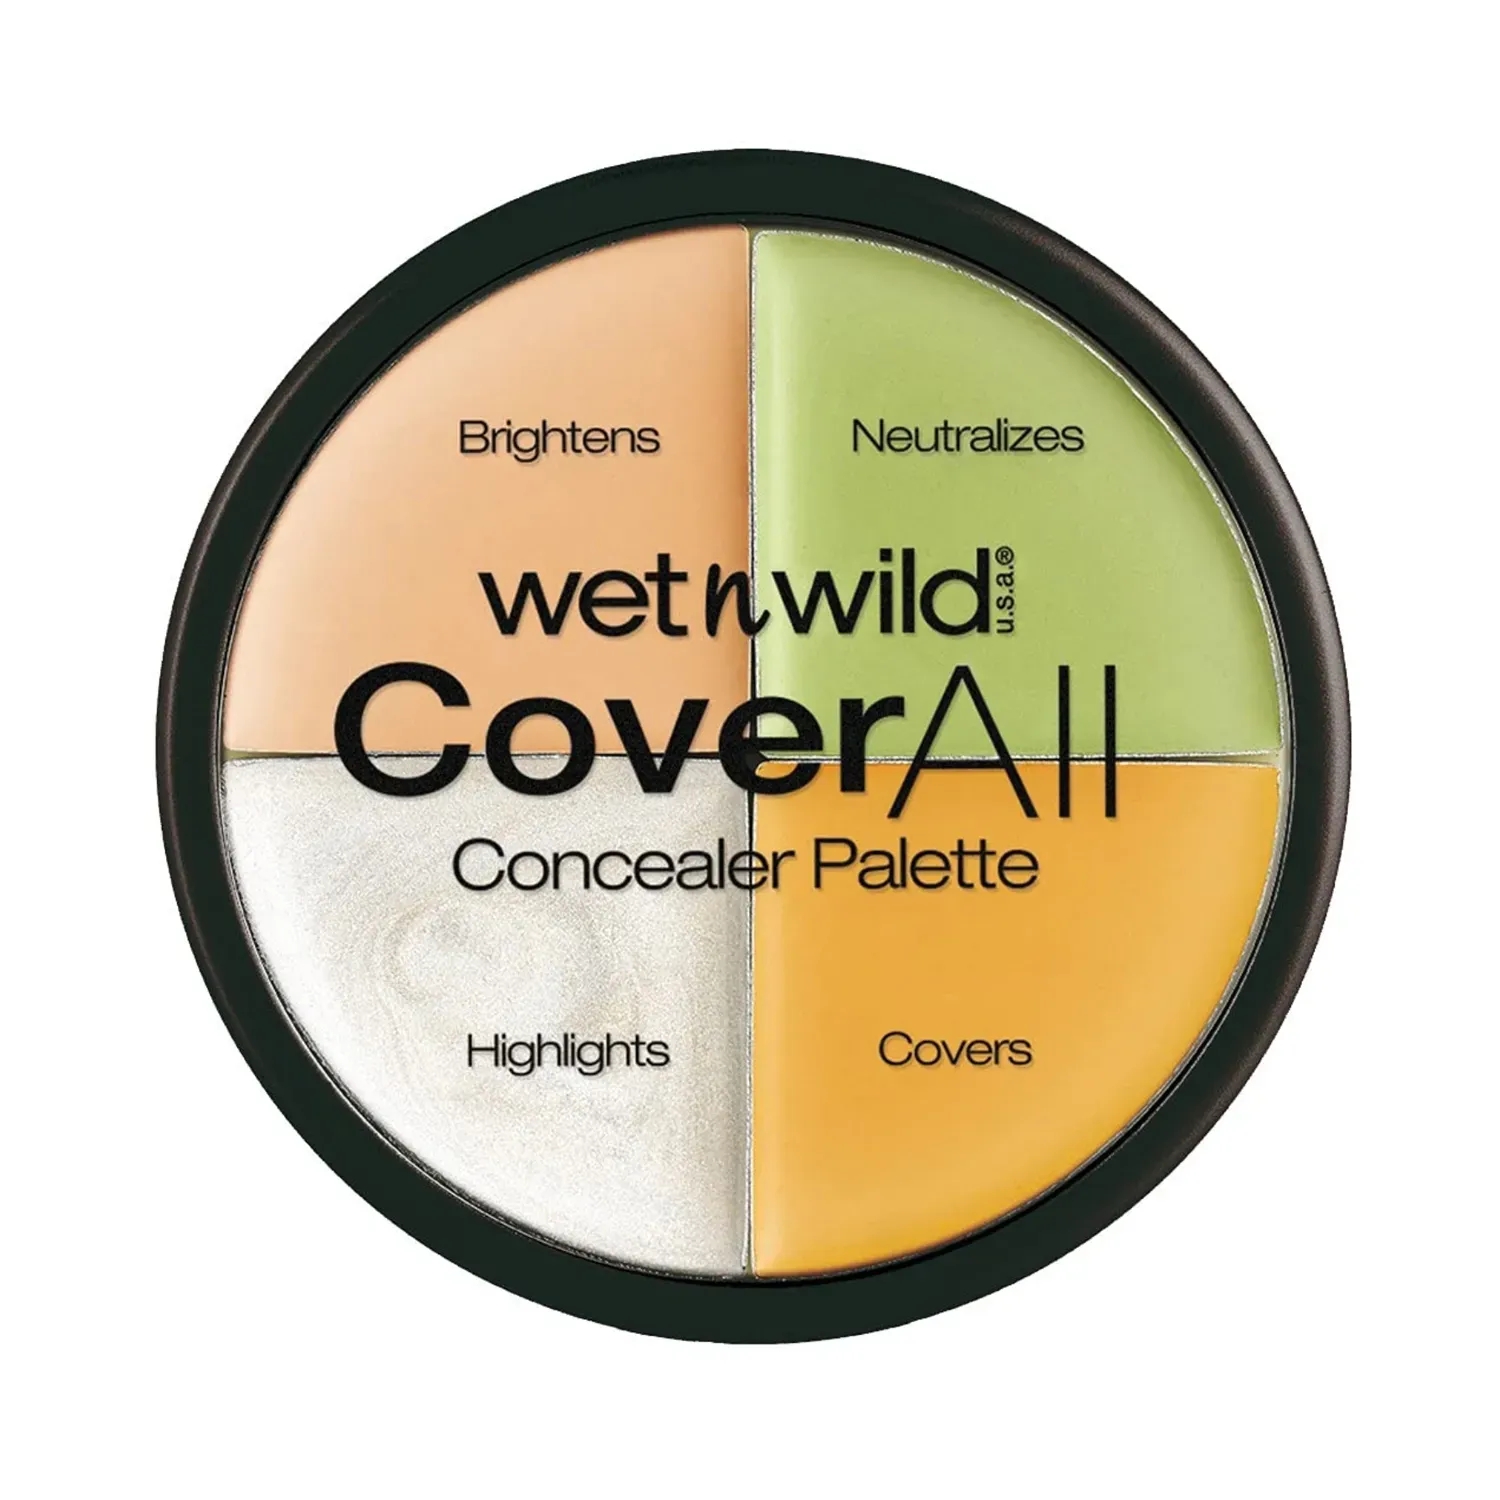 Wet n Wild | Wet n Wild Coverall Concealer Palette - Color Commentary (6.5g)